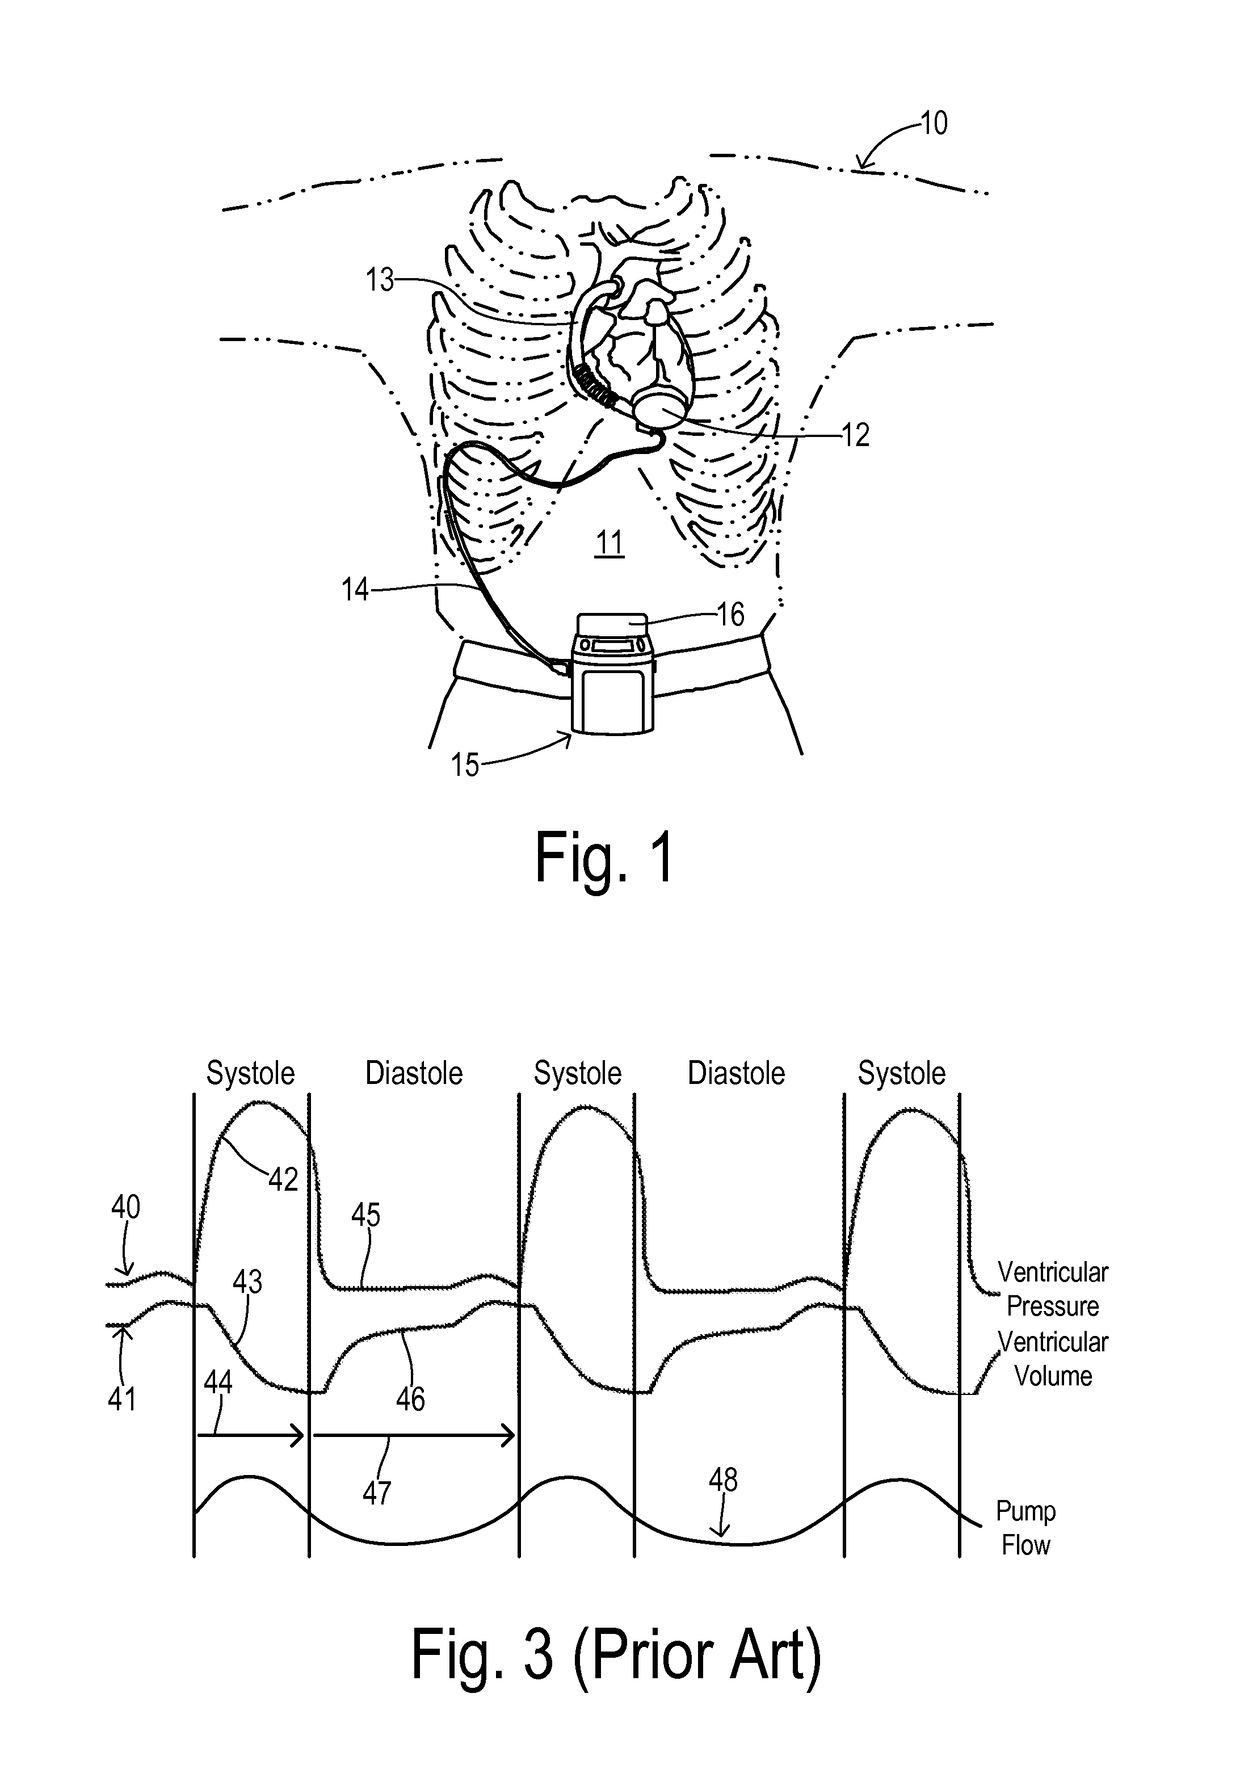 Cardiac pump with speed adapted for ventricle unloading